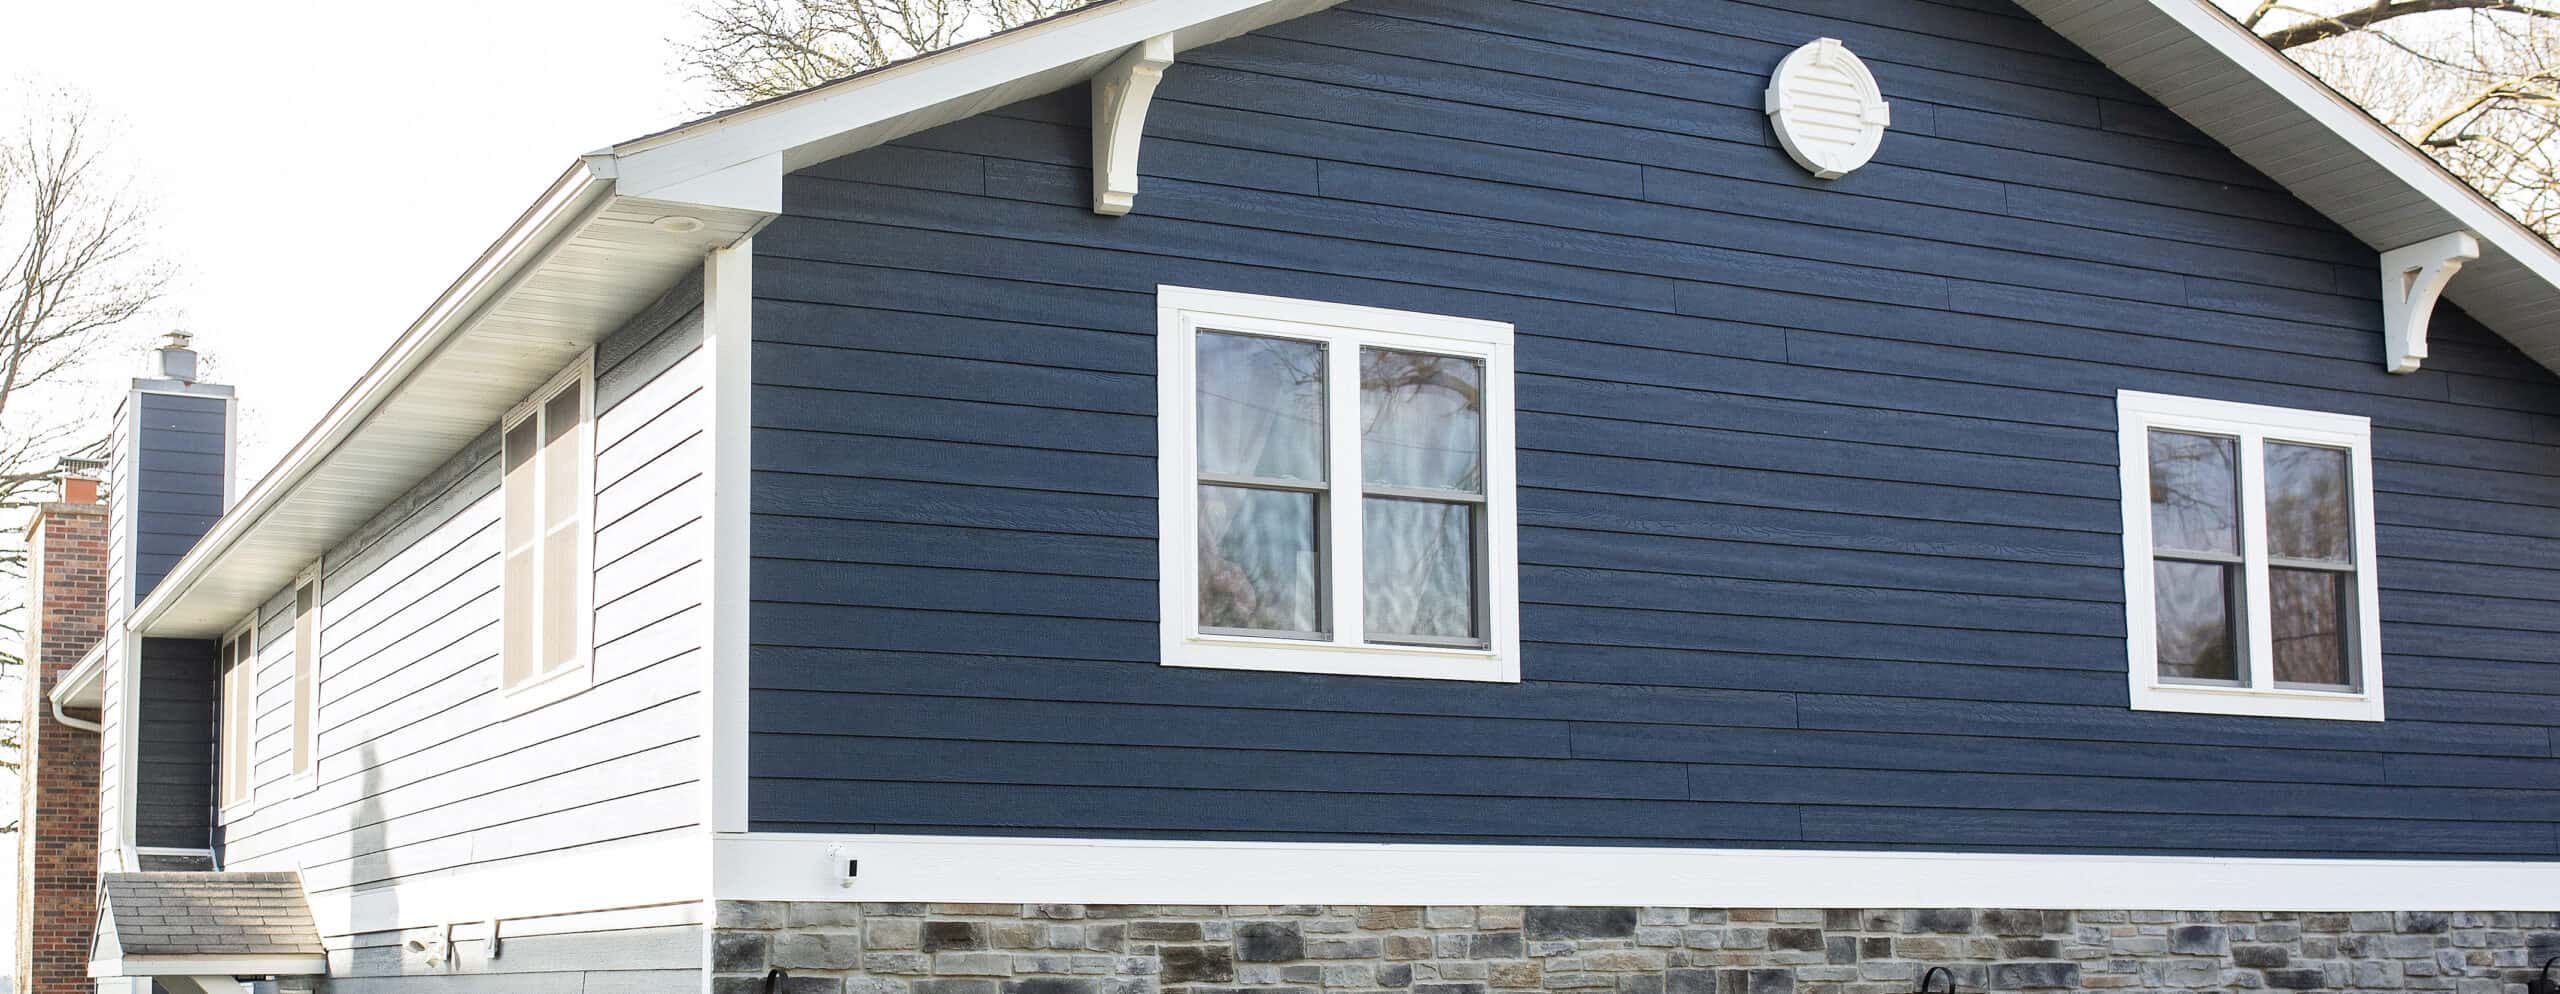 About Roof Contractors Madison Siding Sunrooms 21